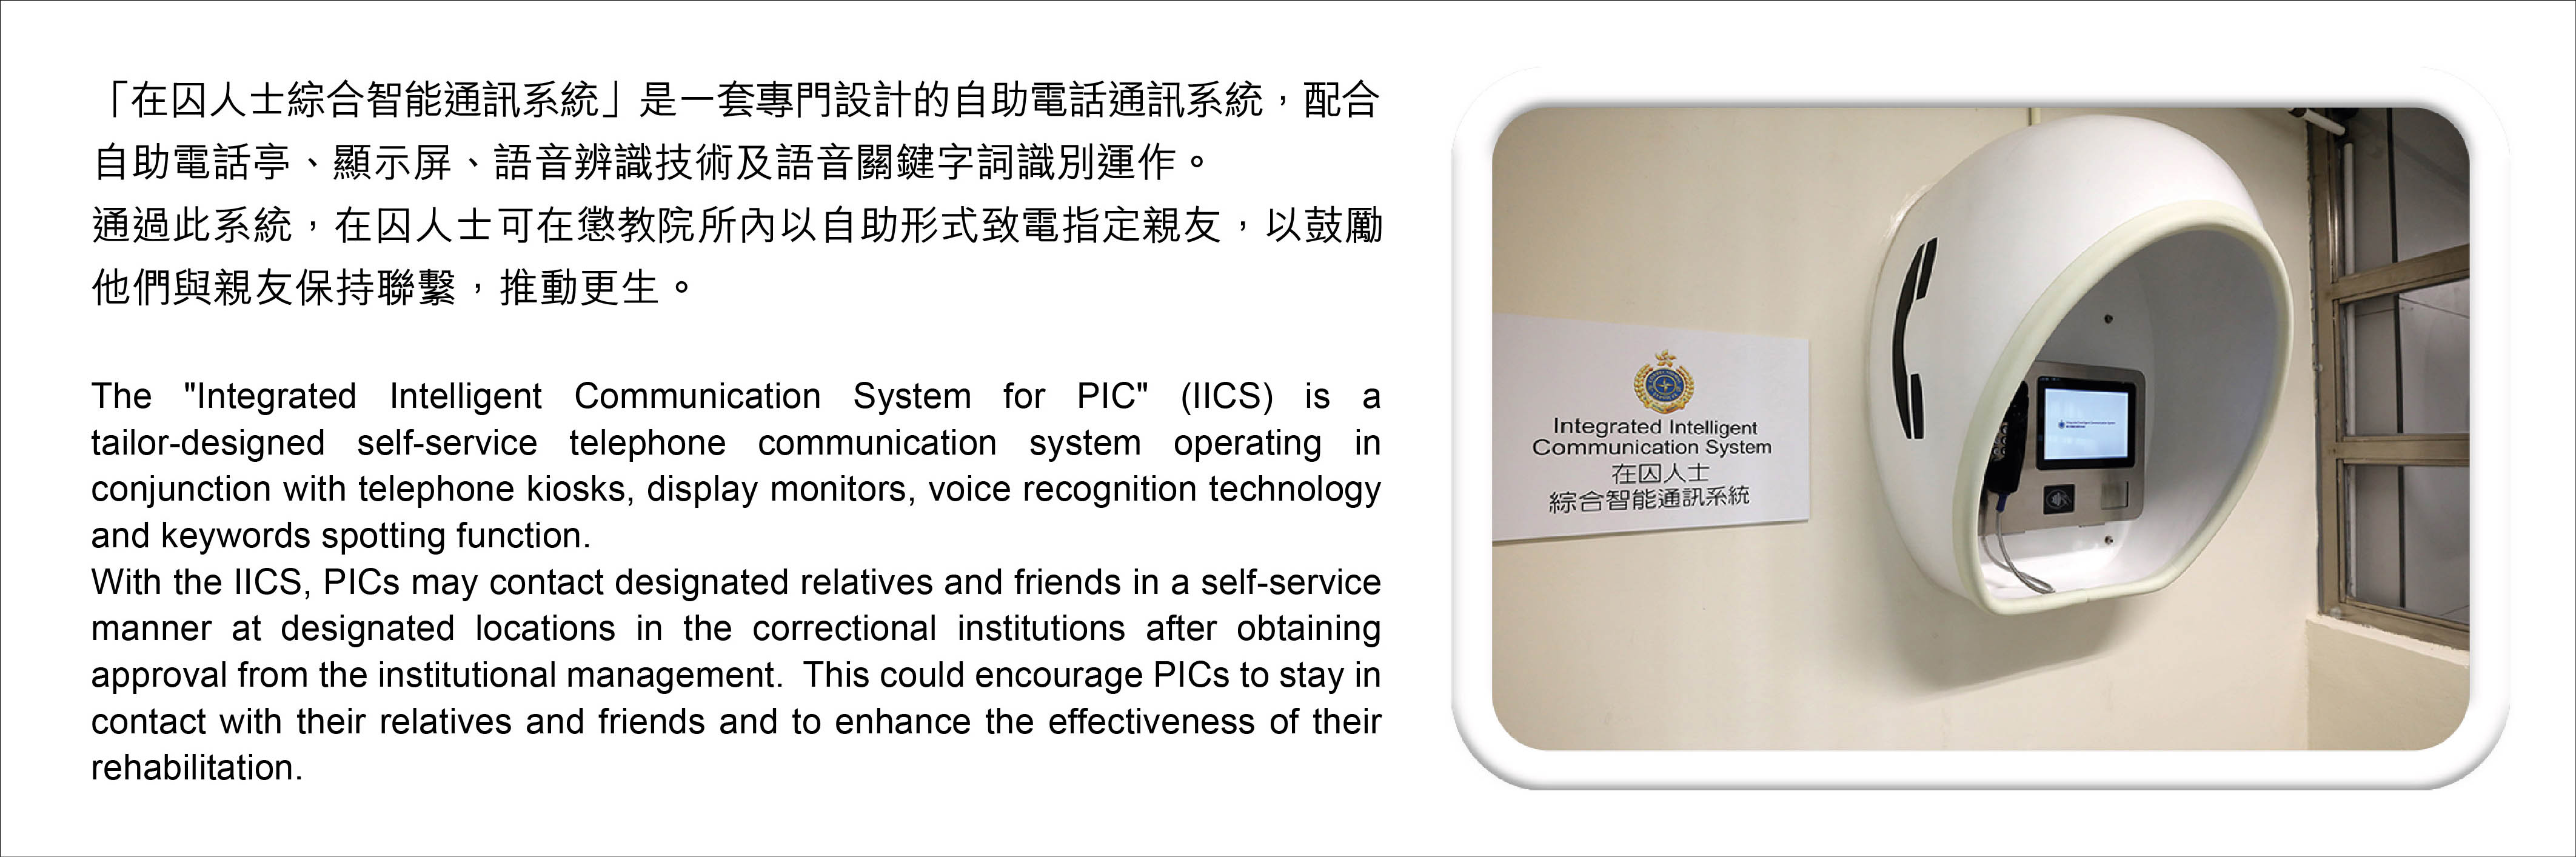 Integrated Intelligent Communication System for PIC